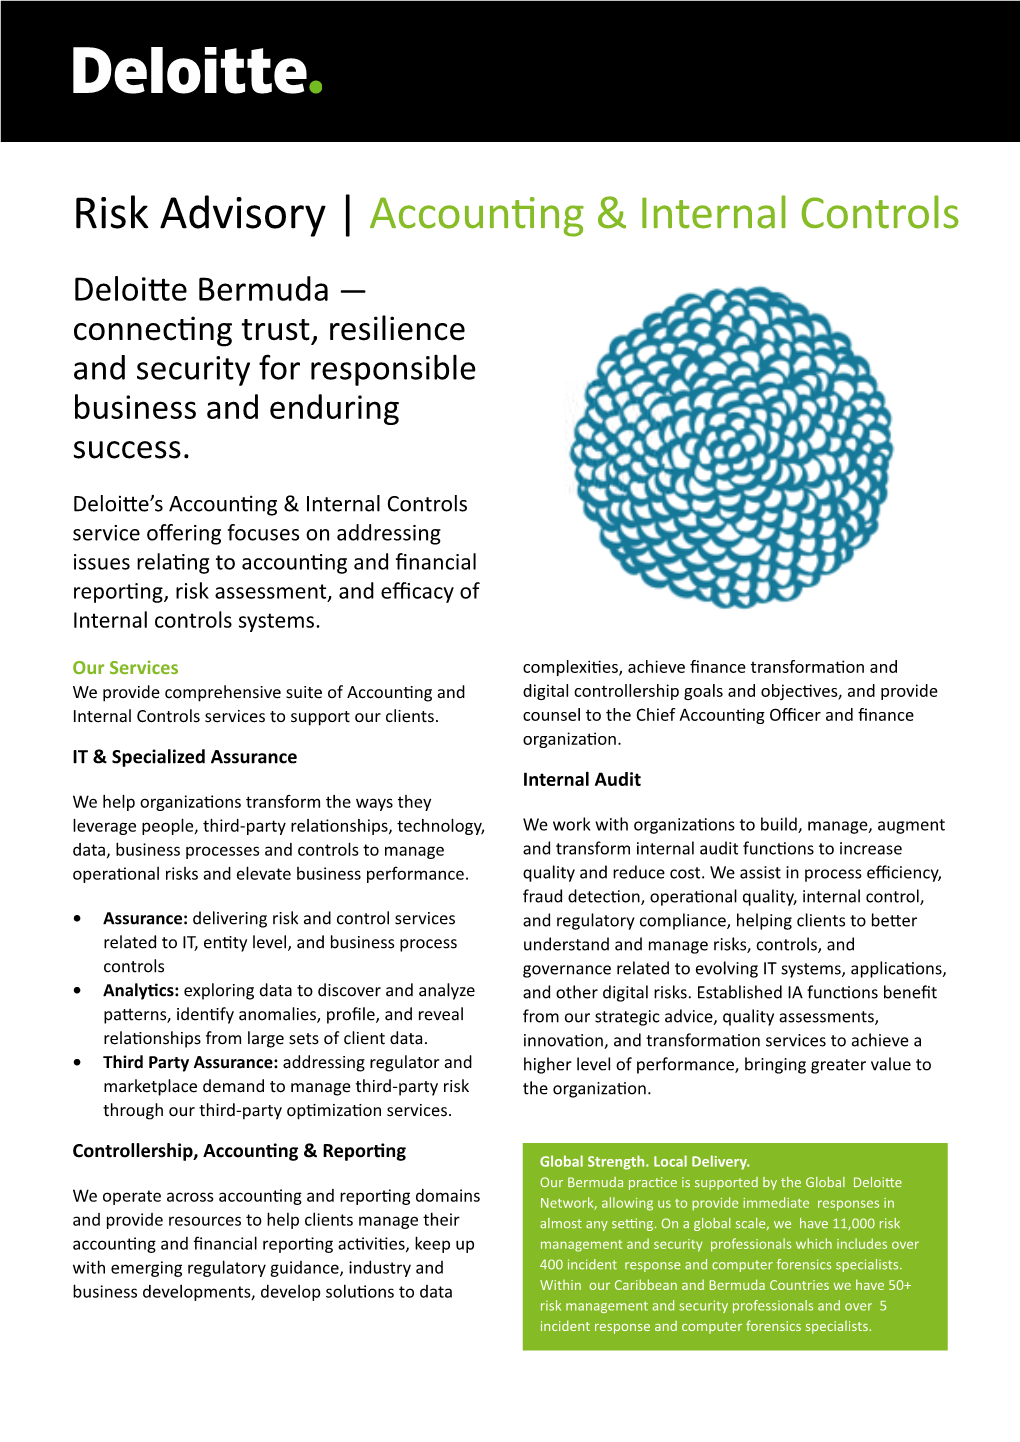 Deloitte Bermuda— Connecting Trust, Resilience and Security for Responsible Business and Enduring Success